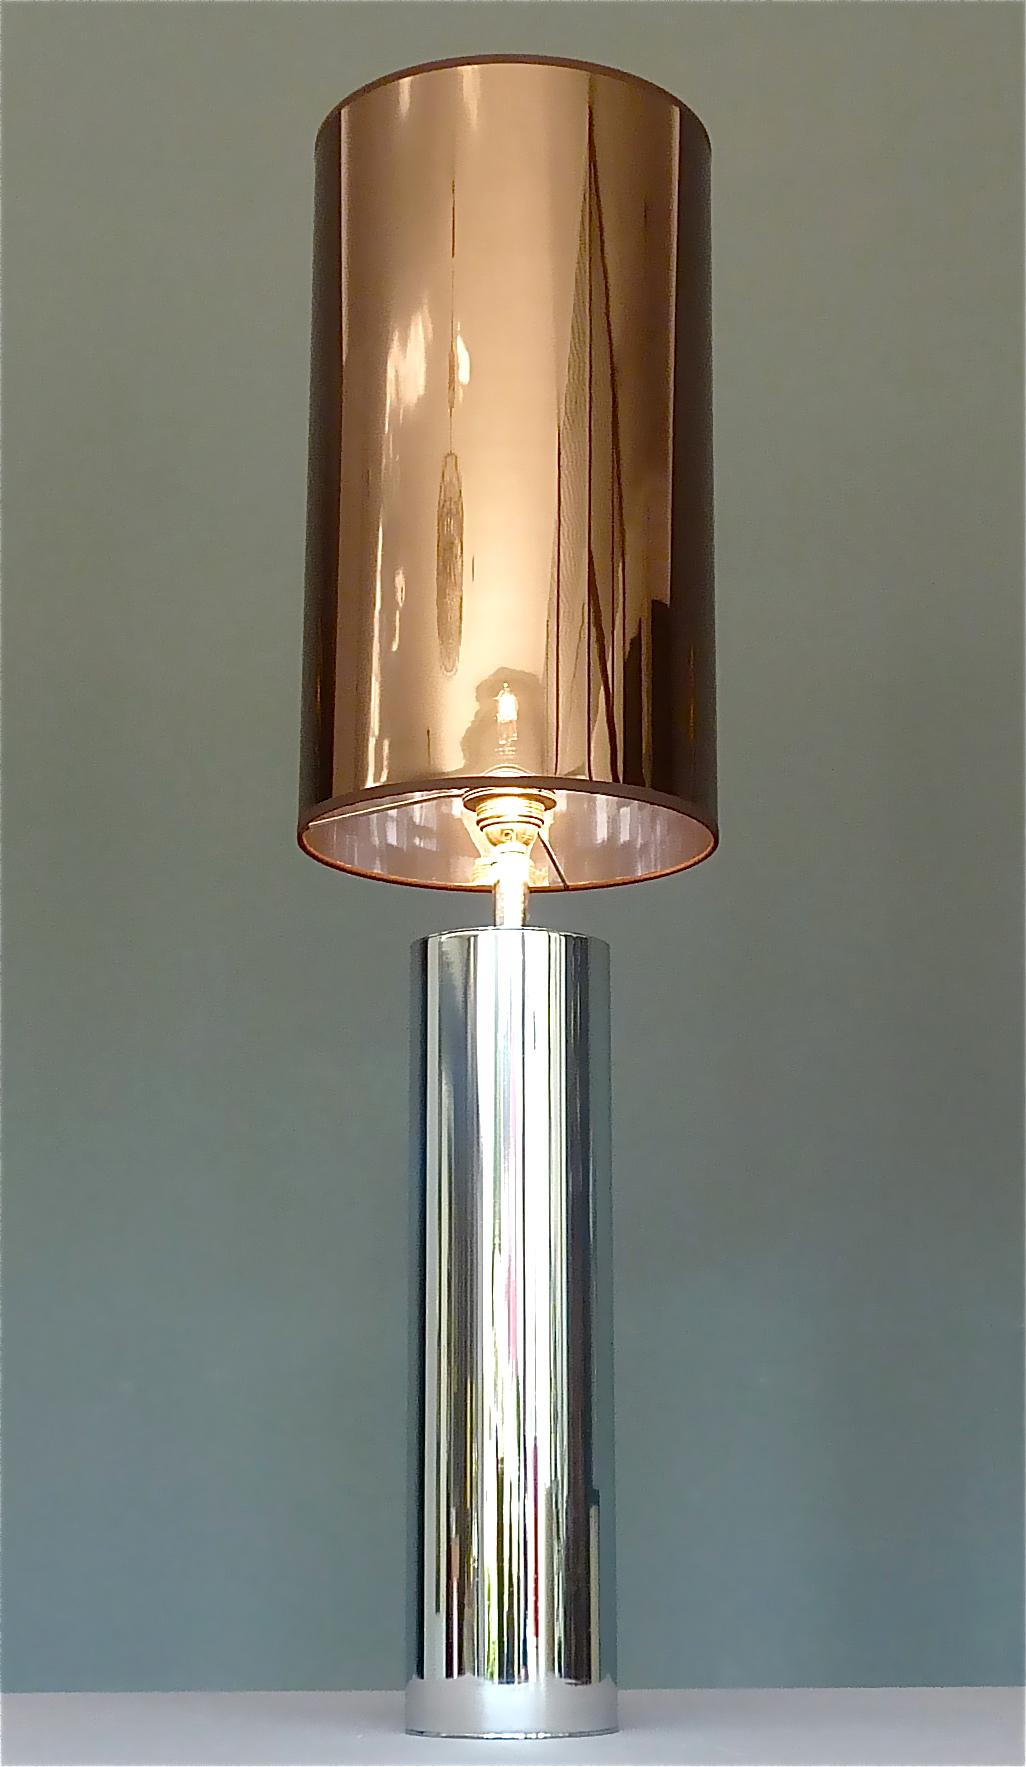 Monumental Chrome Steel Table Lamp Willy Rizzo Cardin Style Bronze Mirror 1970s For Sale 9